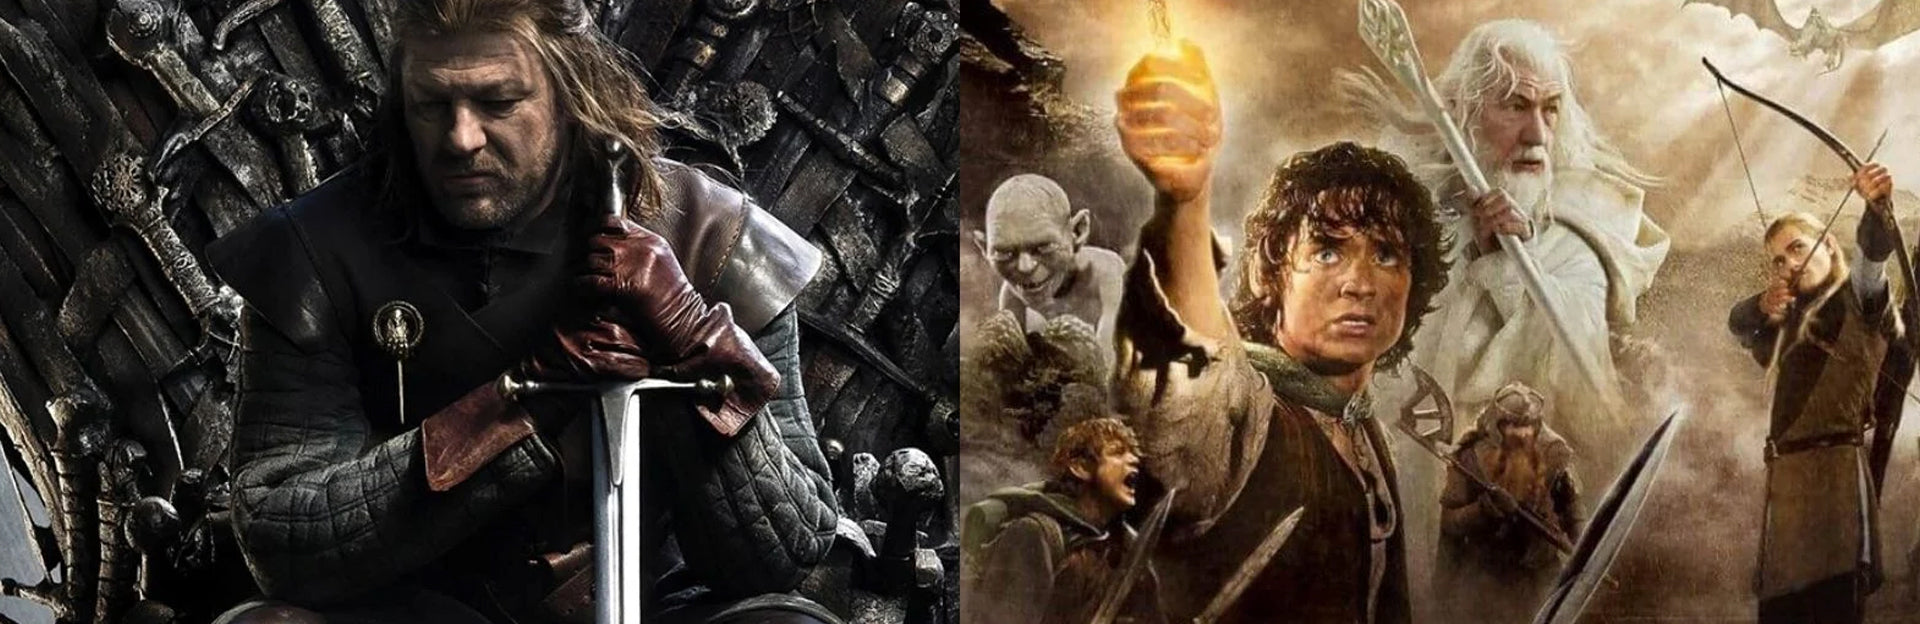 Game of Thrones vs Lord of the Rings (2023 Updated)